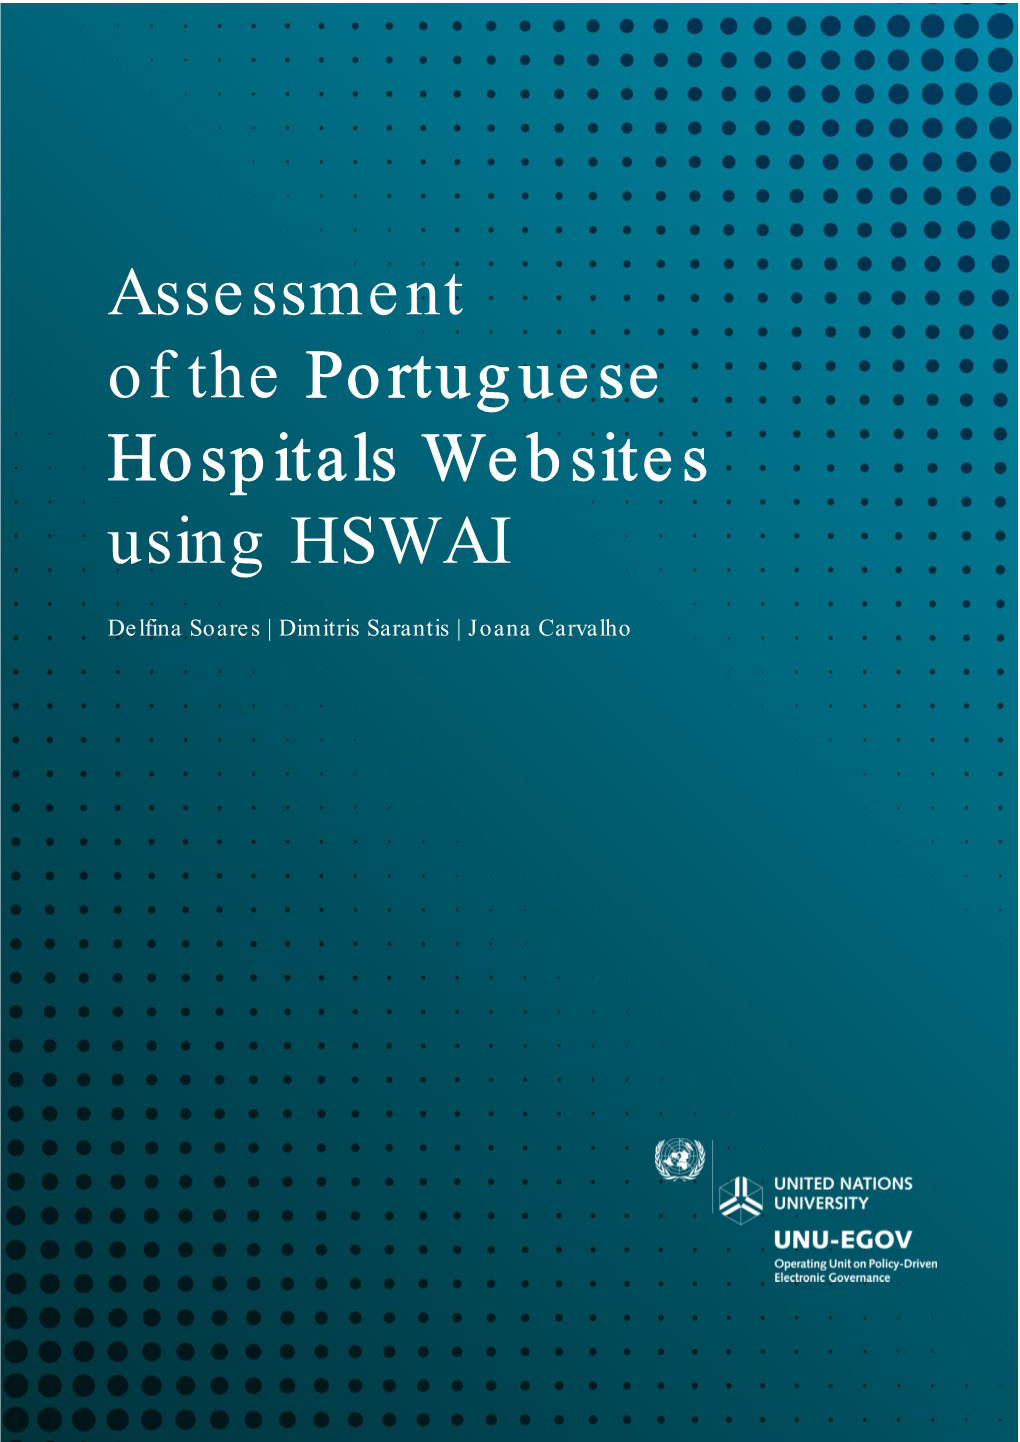 Assessment of the Portuguese Hospitals Website Using HSWAI